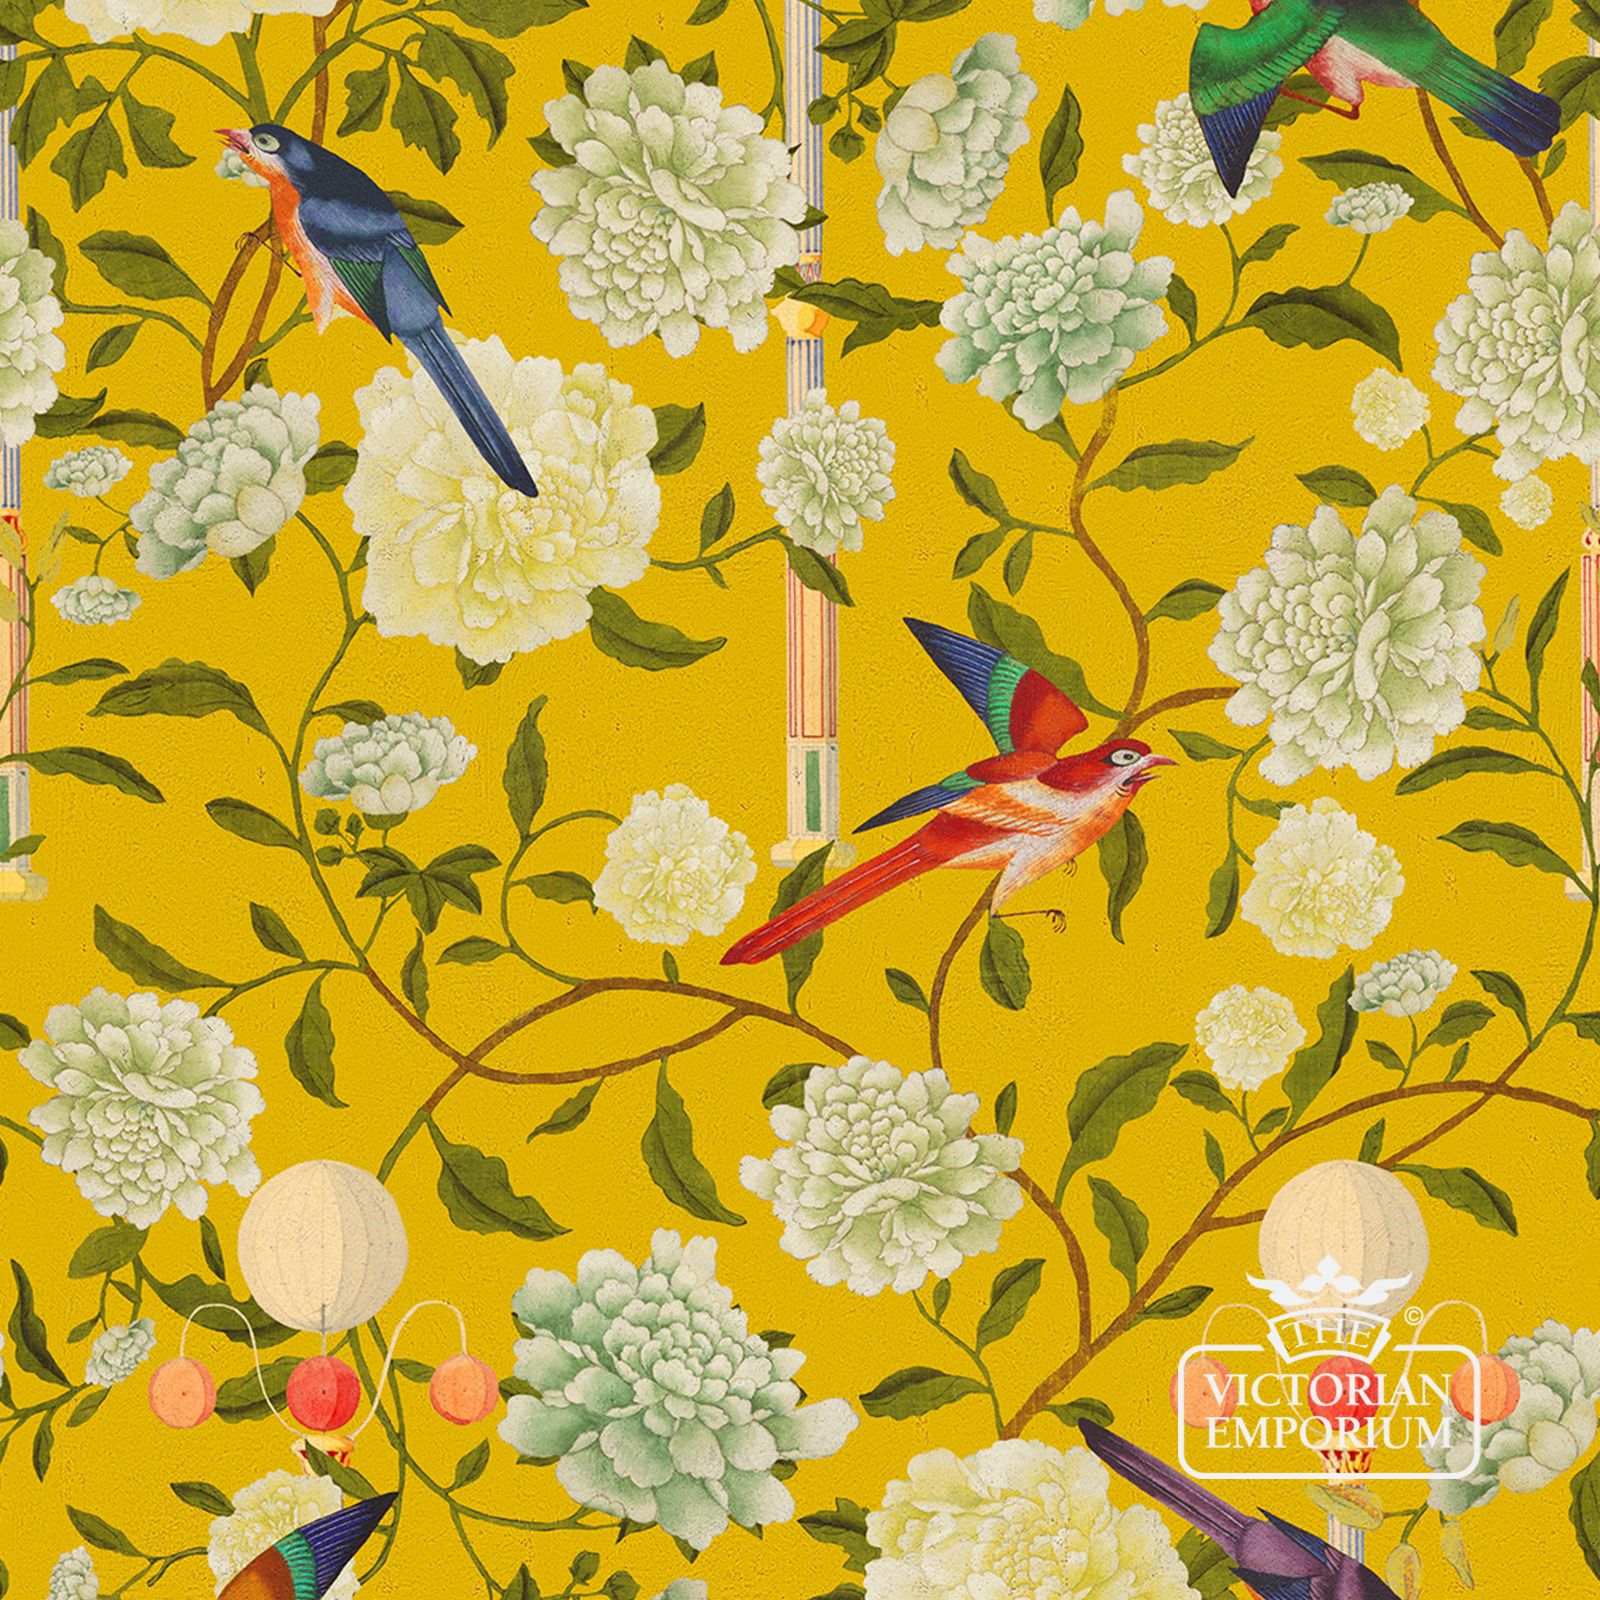 Garden of Immortality Wallpaper in a choice of blue or yellow